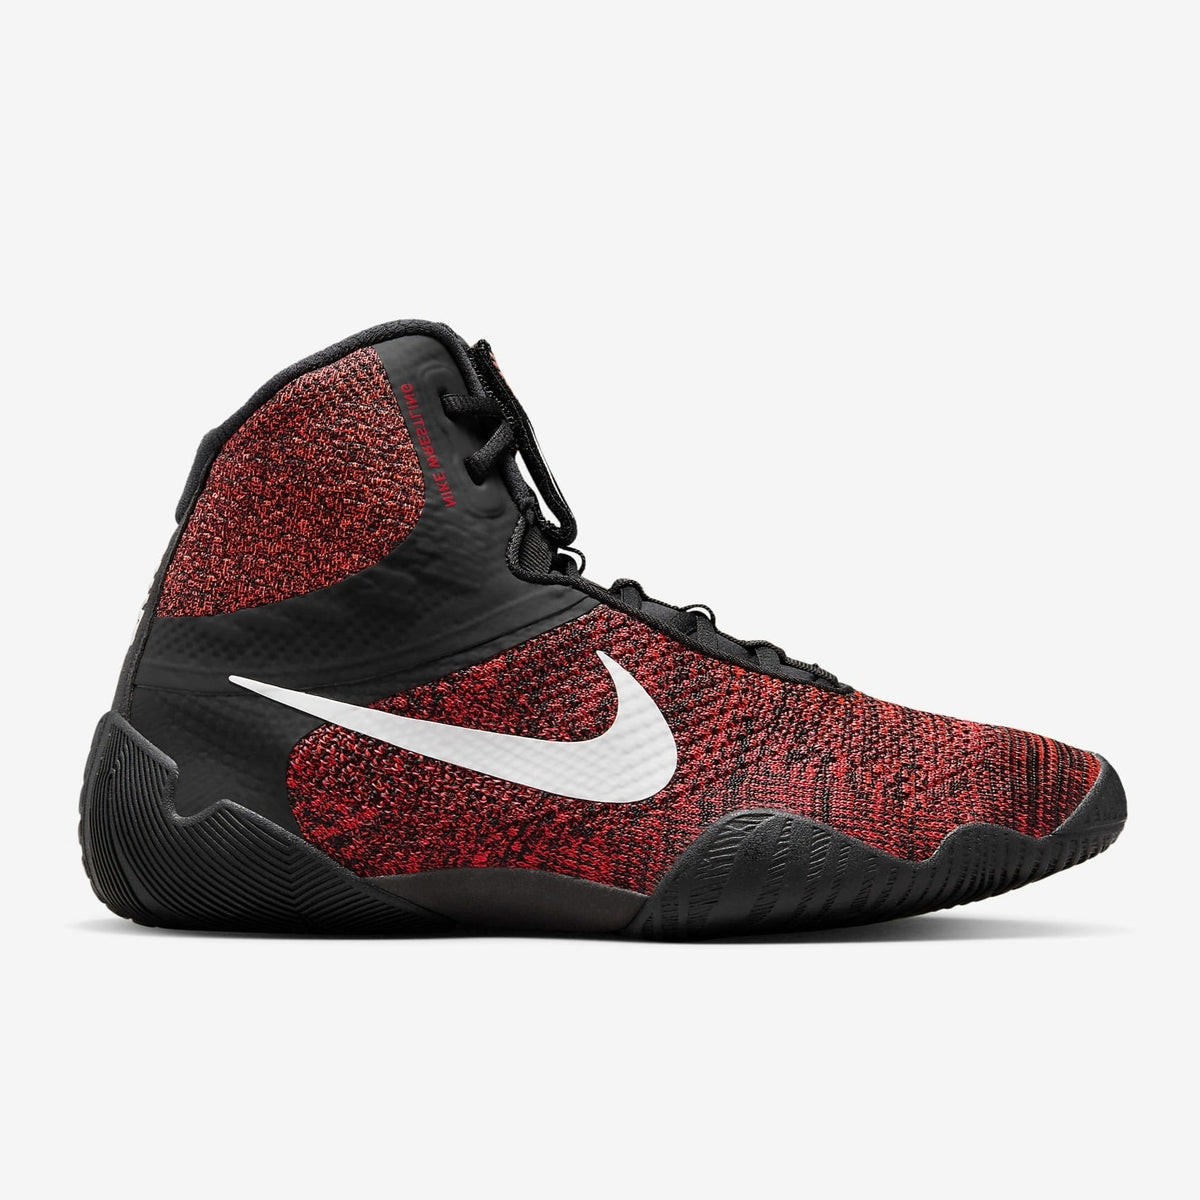 Nike TAWA wrestling shoes. Worn on the mat by world champions and Olympic champions. Great support during training and competition in the usual Nike quality. Wrestling shoes in red/black.